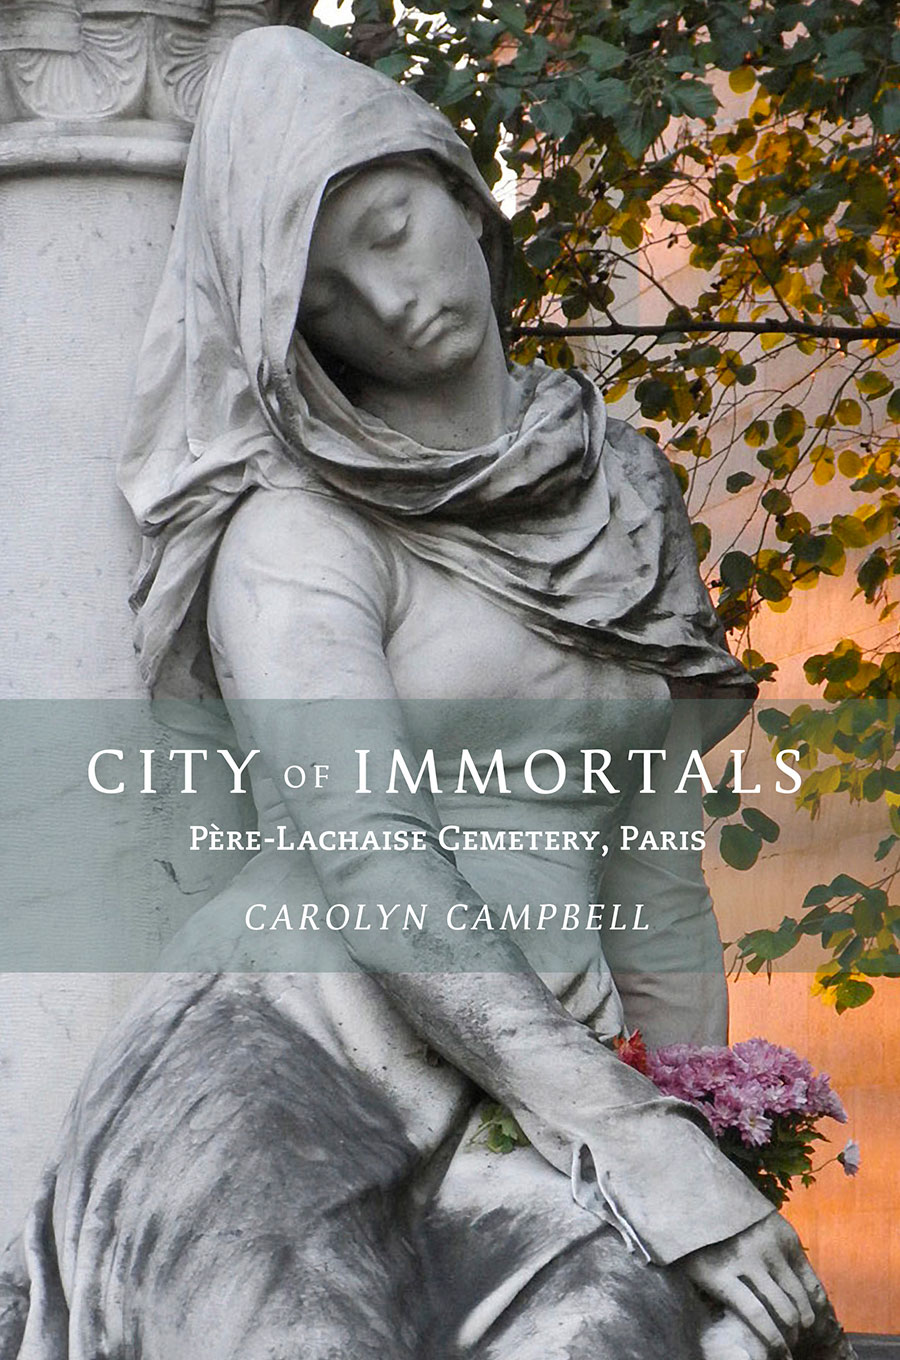 Front cover of City of Immortals Book book by Carolyn Campbell